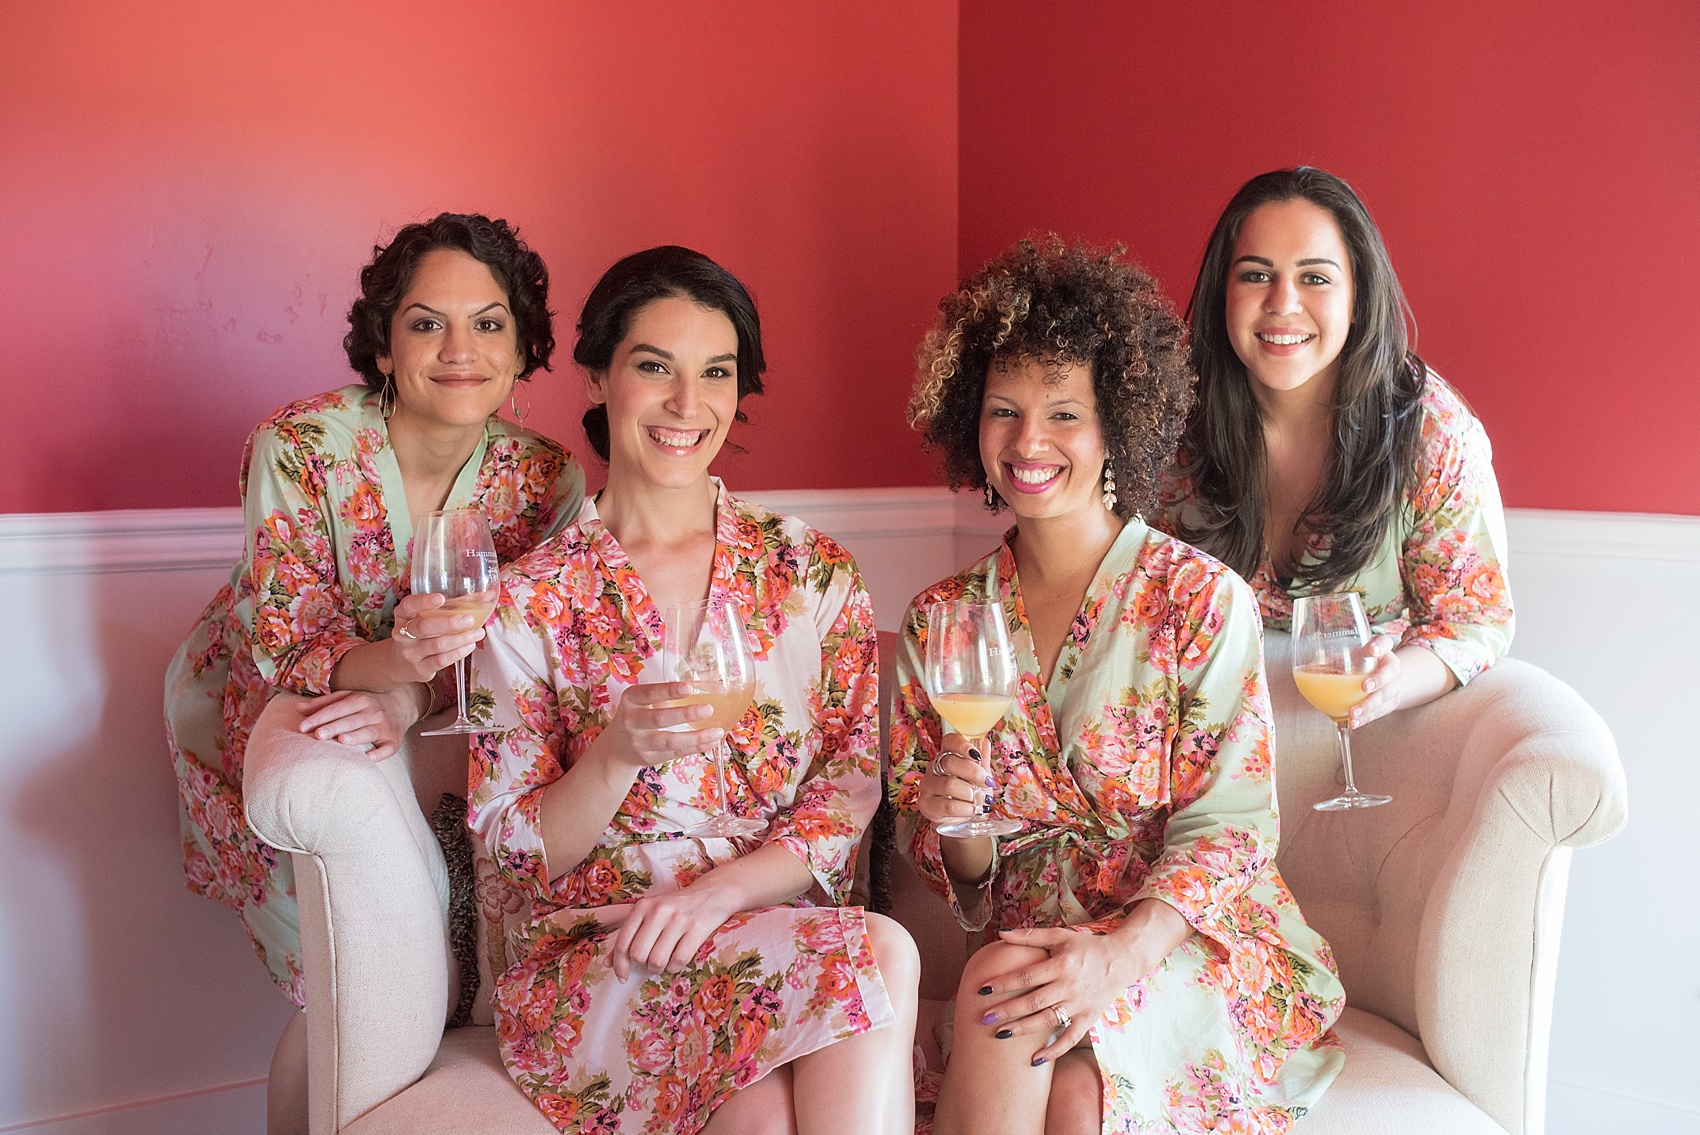 Bride prepares for her vineyard elopement with Mikkel Paige, destination wedding photographer. Held at HammerSky Vineyard, south of San Francisco. Pictured with her bridesmaids in floral robes. 